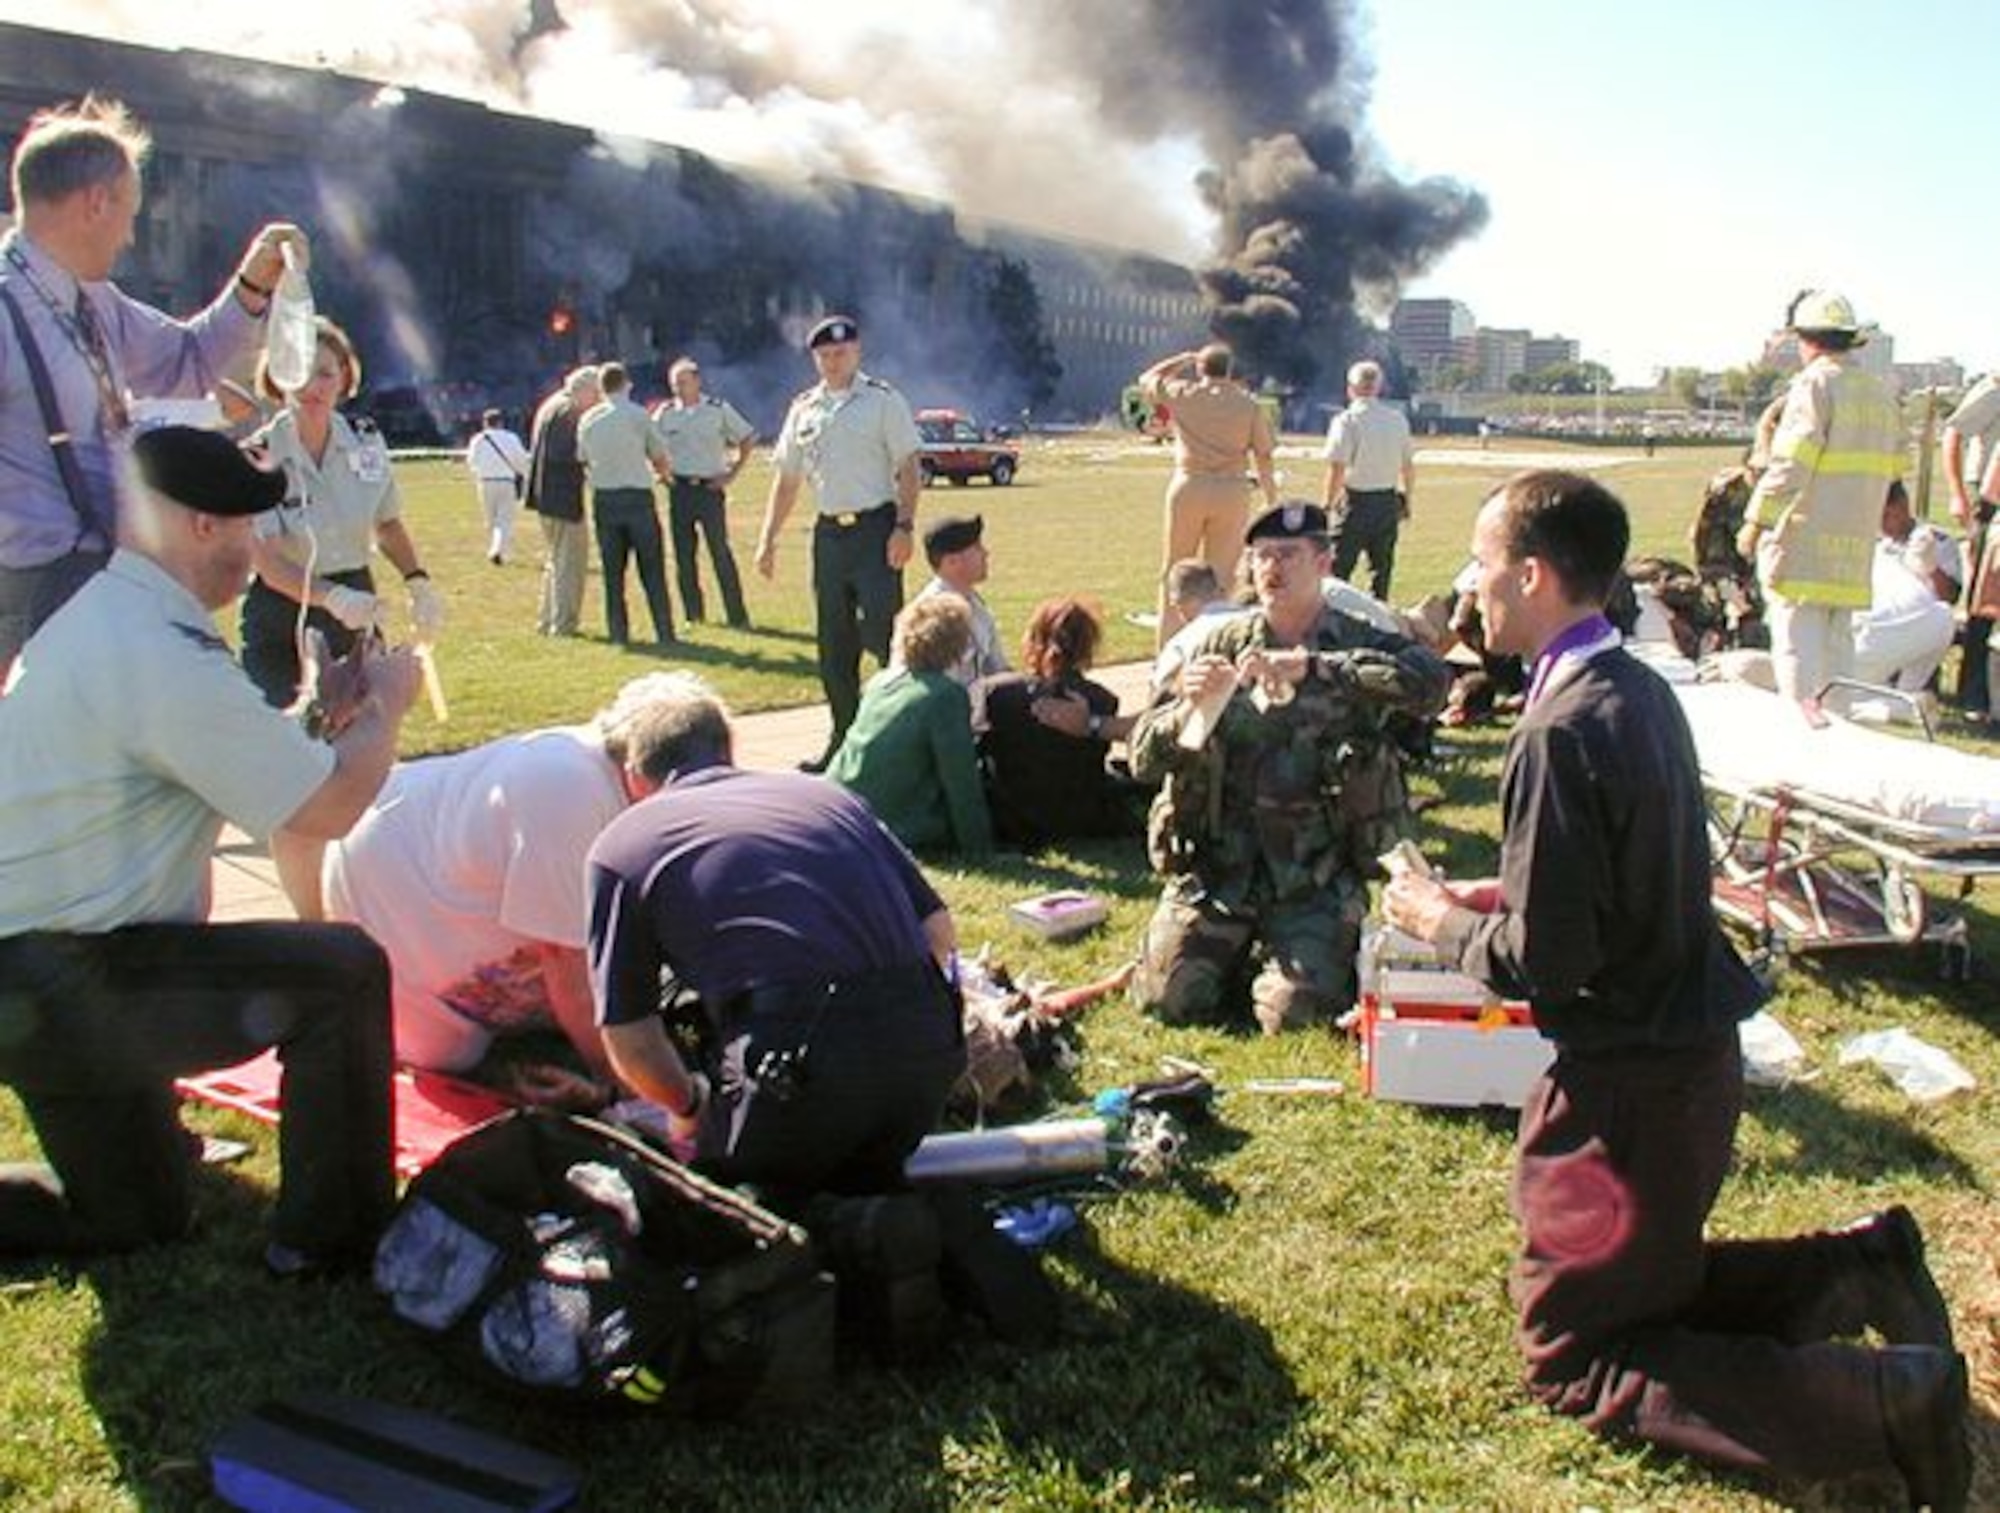 A wounded man outside the Pentagon’s west entrance receives medical attention from emergency responders as a priest prays over him, Sept. 11, 2001. In addition to the Pentagon’s 125 casualties, roughly 106 people were injured by the damage caused from the terrorist attack against the building. (Navy Times photo by Mark Faram/Released)